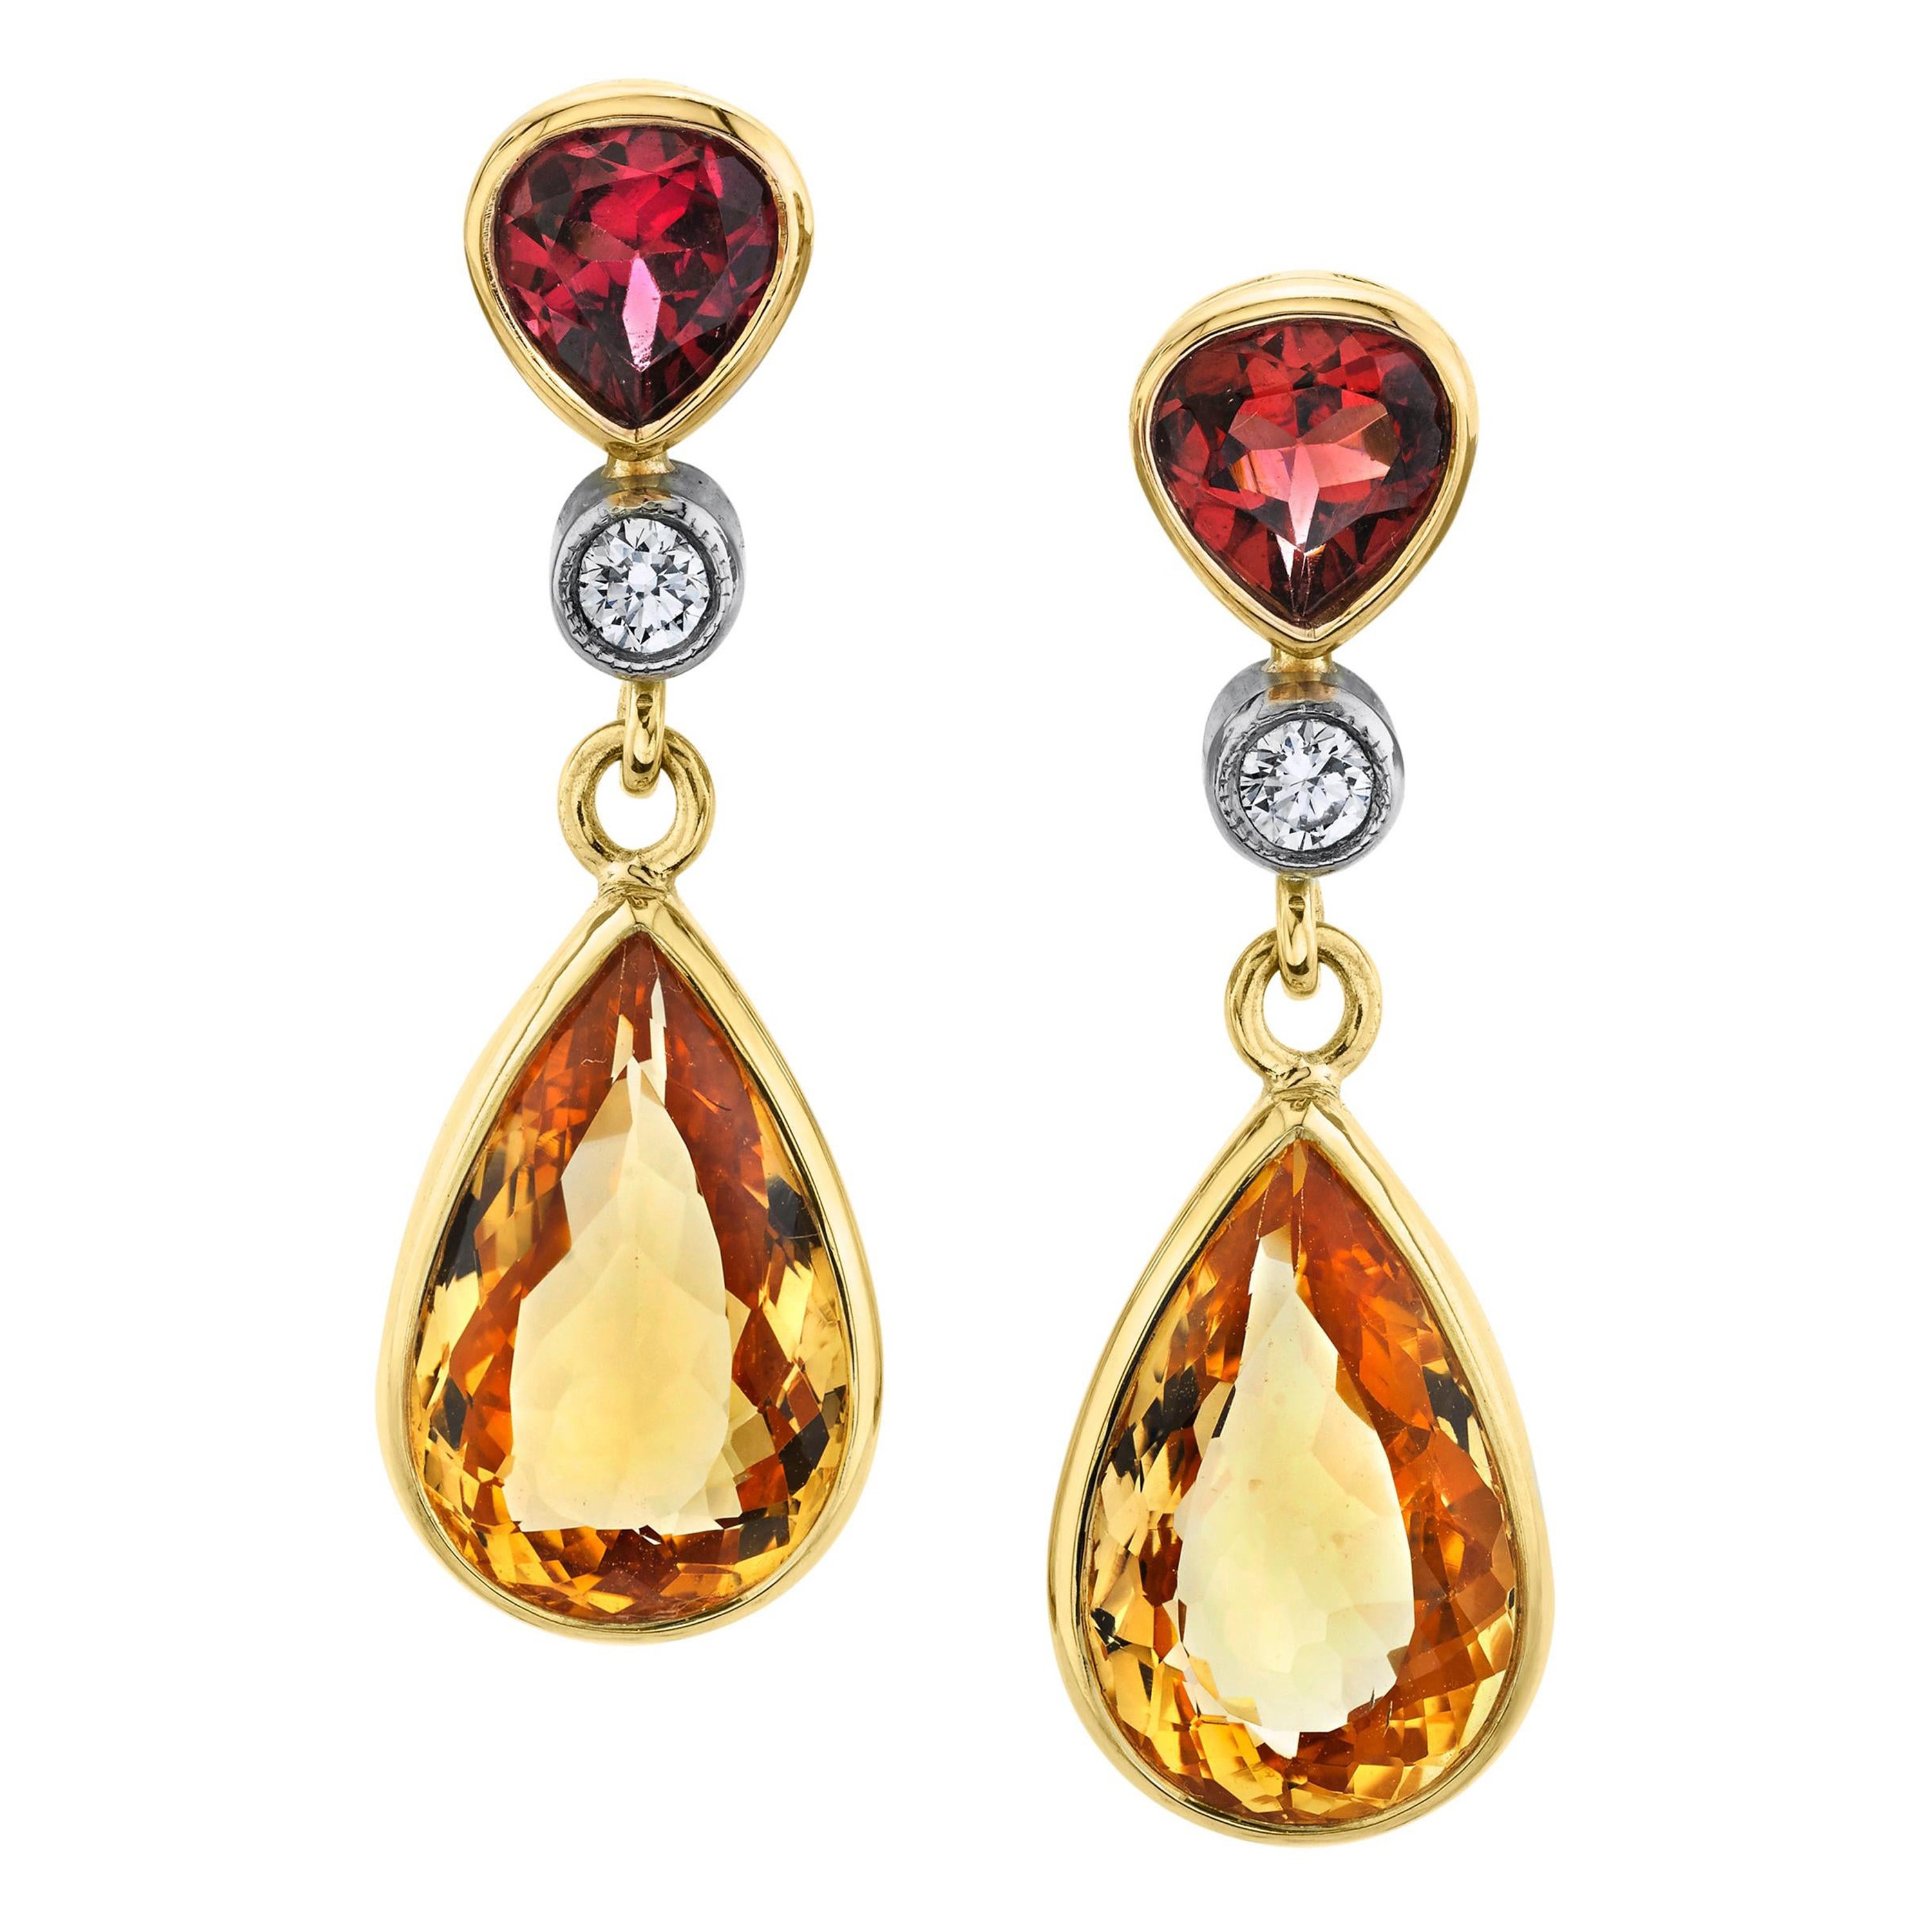 Precious Topaz and Garnet Drop Earrings 18K Yellow Gold, 9.74 Carats Total  For Sale